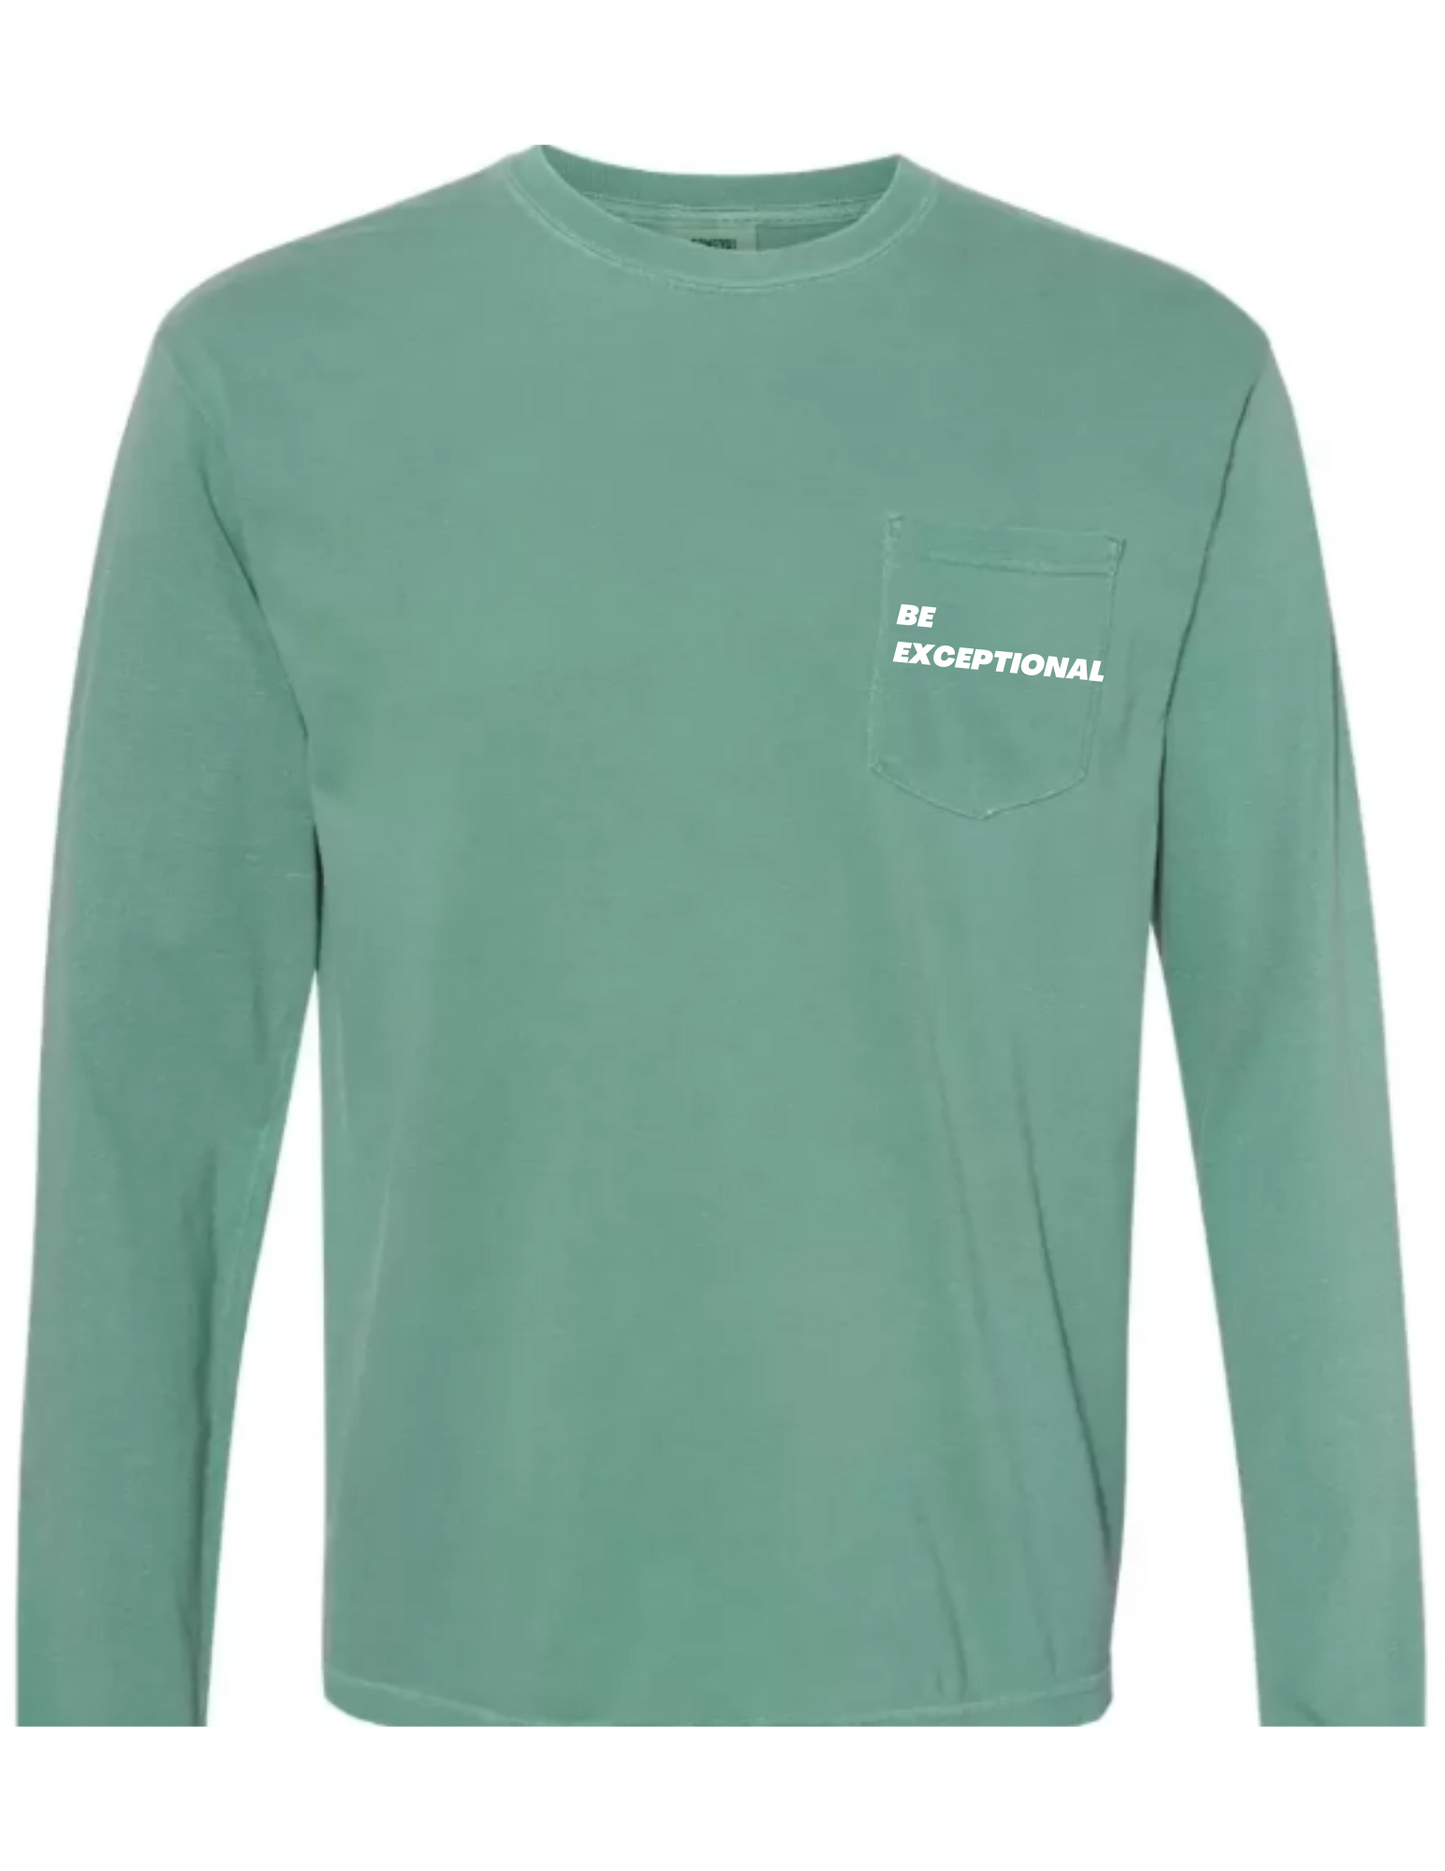 "Be Exceptional" Long-sleeve Pocket T-Shirt